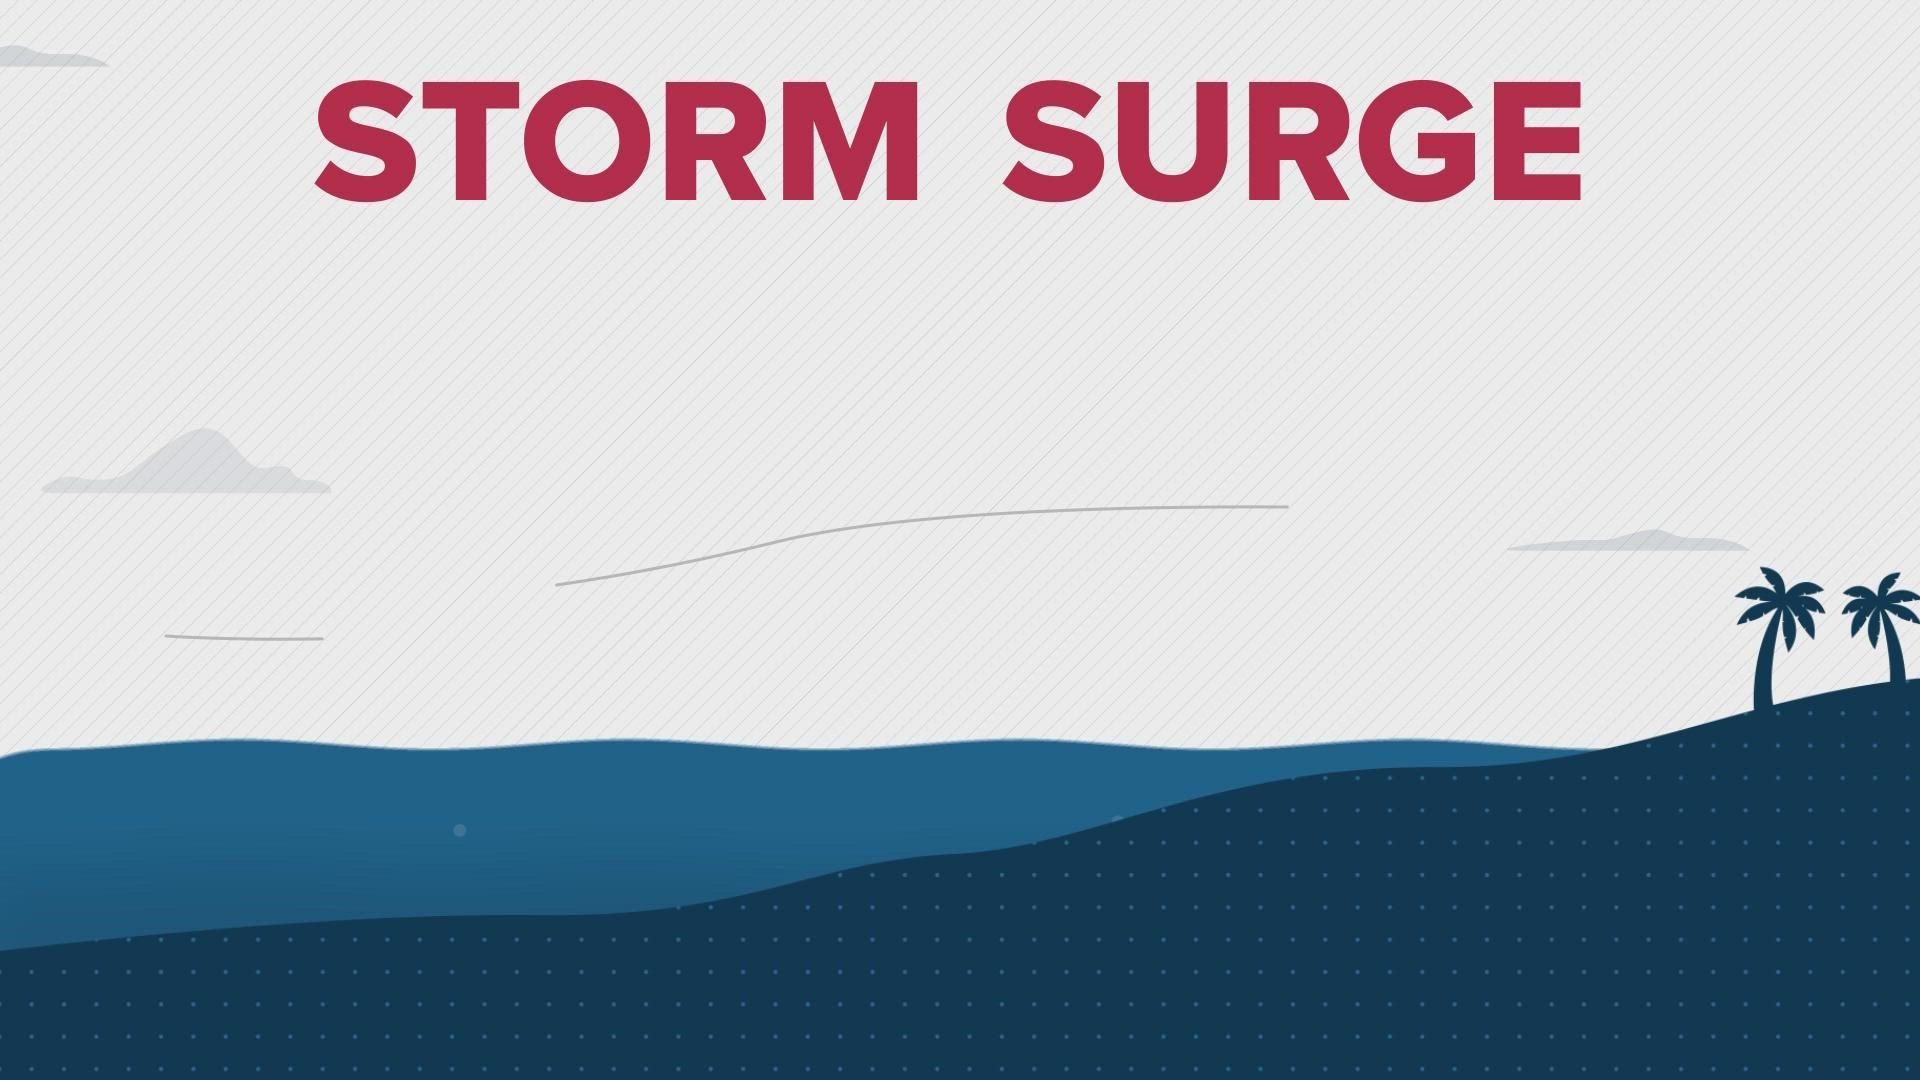 Storm surge is the most deadly part of a hurricane in many cases. But why? Let’s dive into the science to learn more.